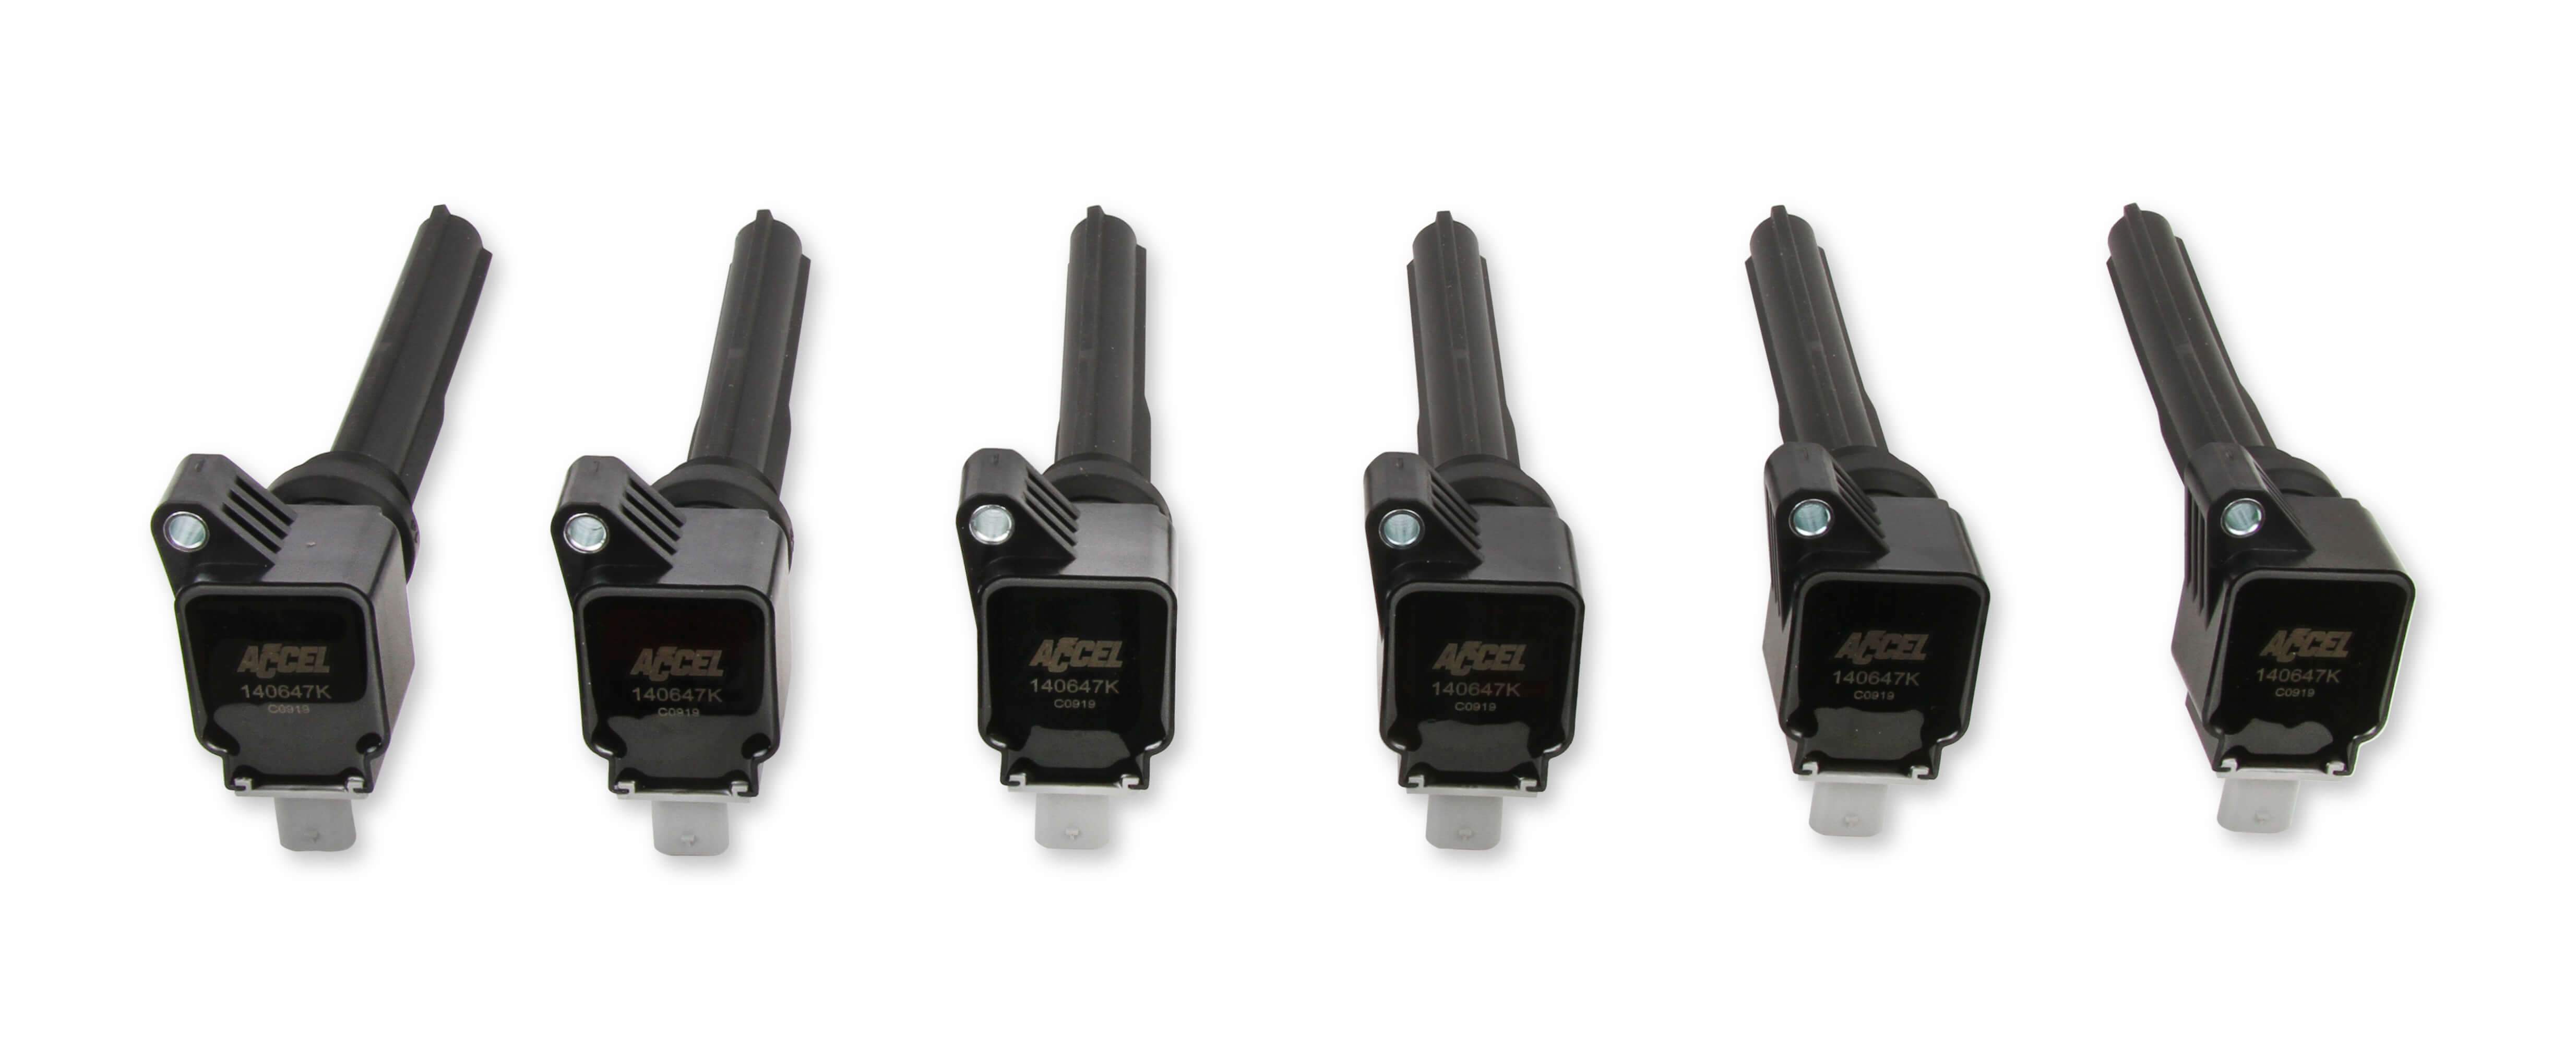 '17-20 Ford EcoBoost 3.5L Ignition Coils-6 Pack Electrical Accel display